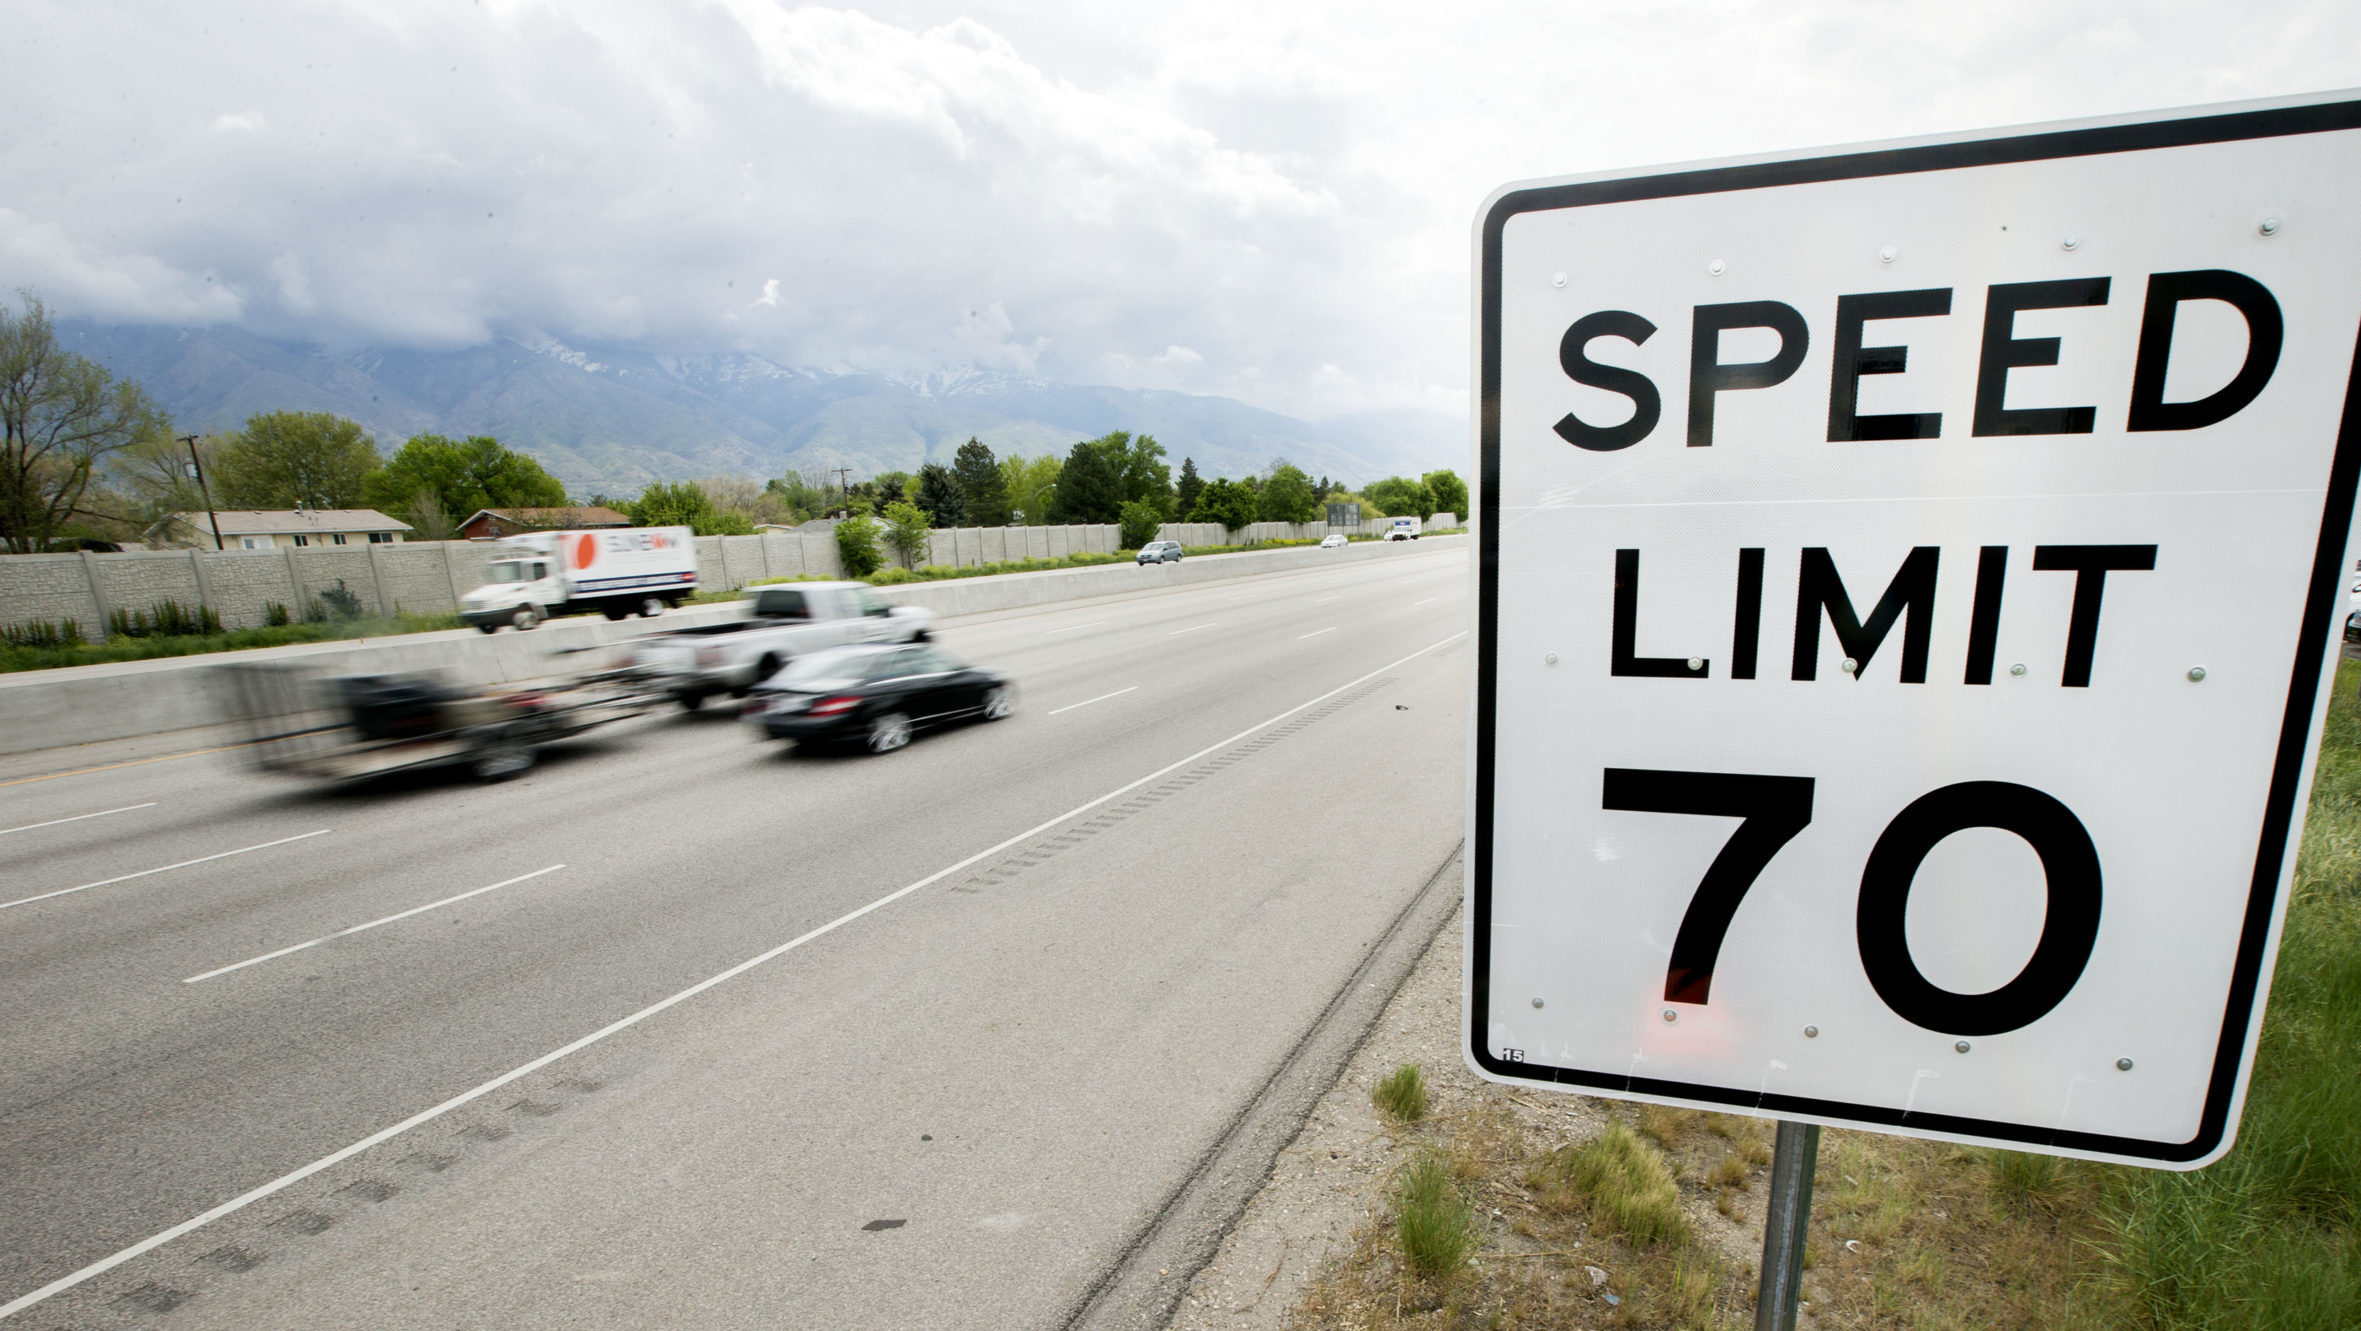 A speed limit sign saying "70 MPH" is shows, utah drivers have been caught at high speeds recently...